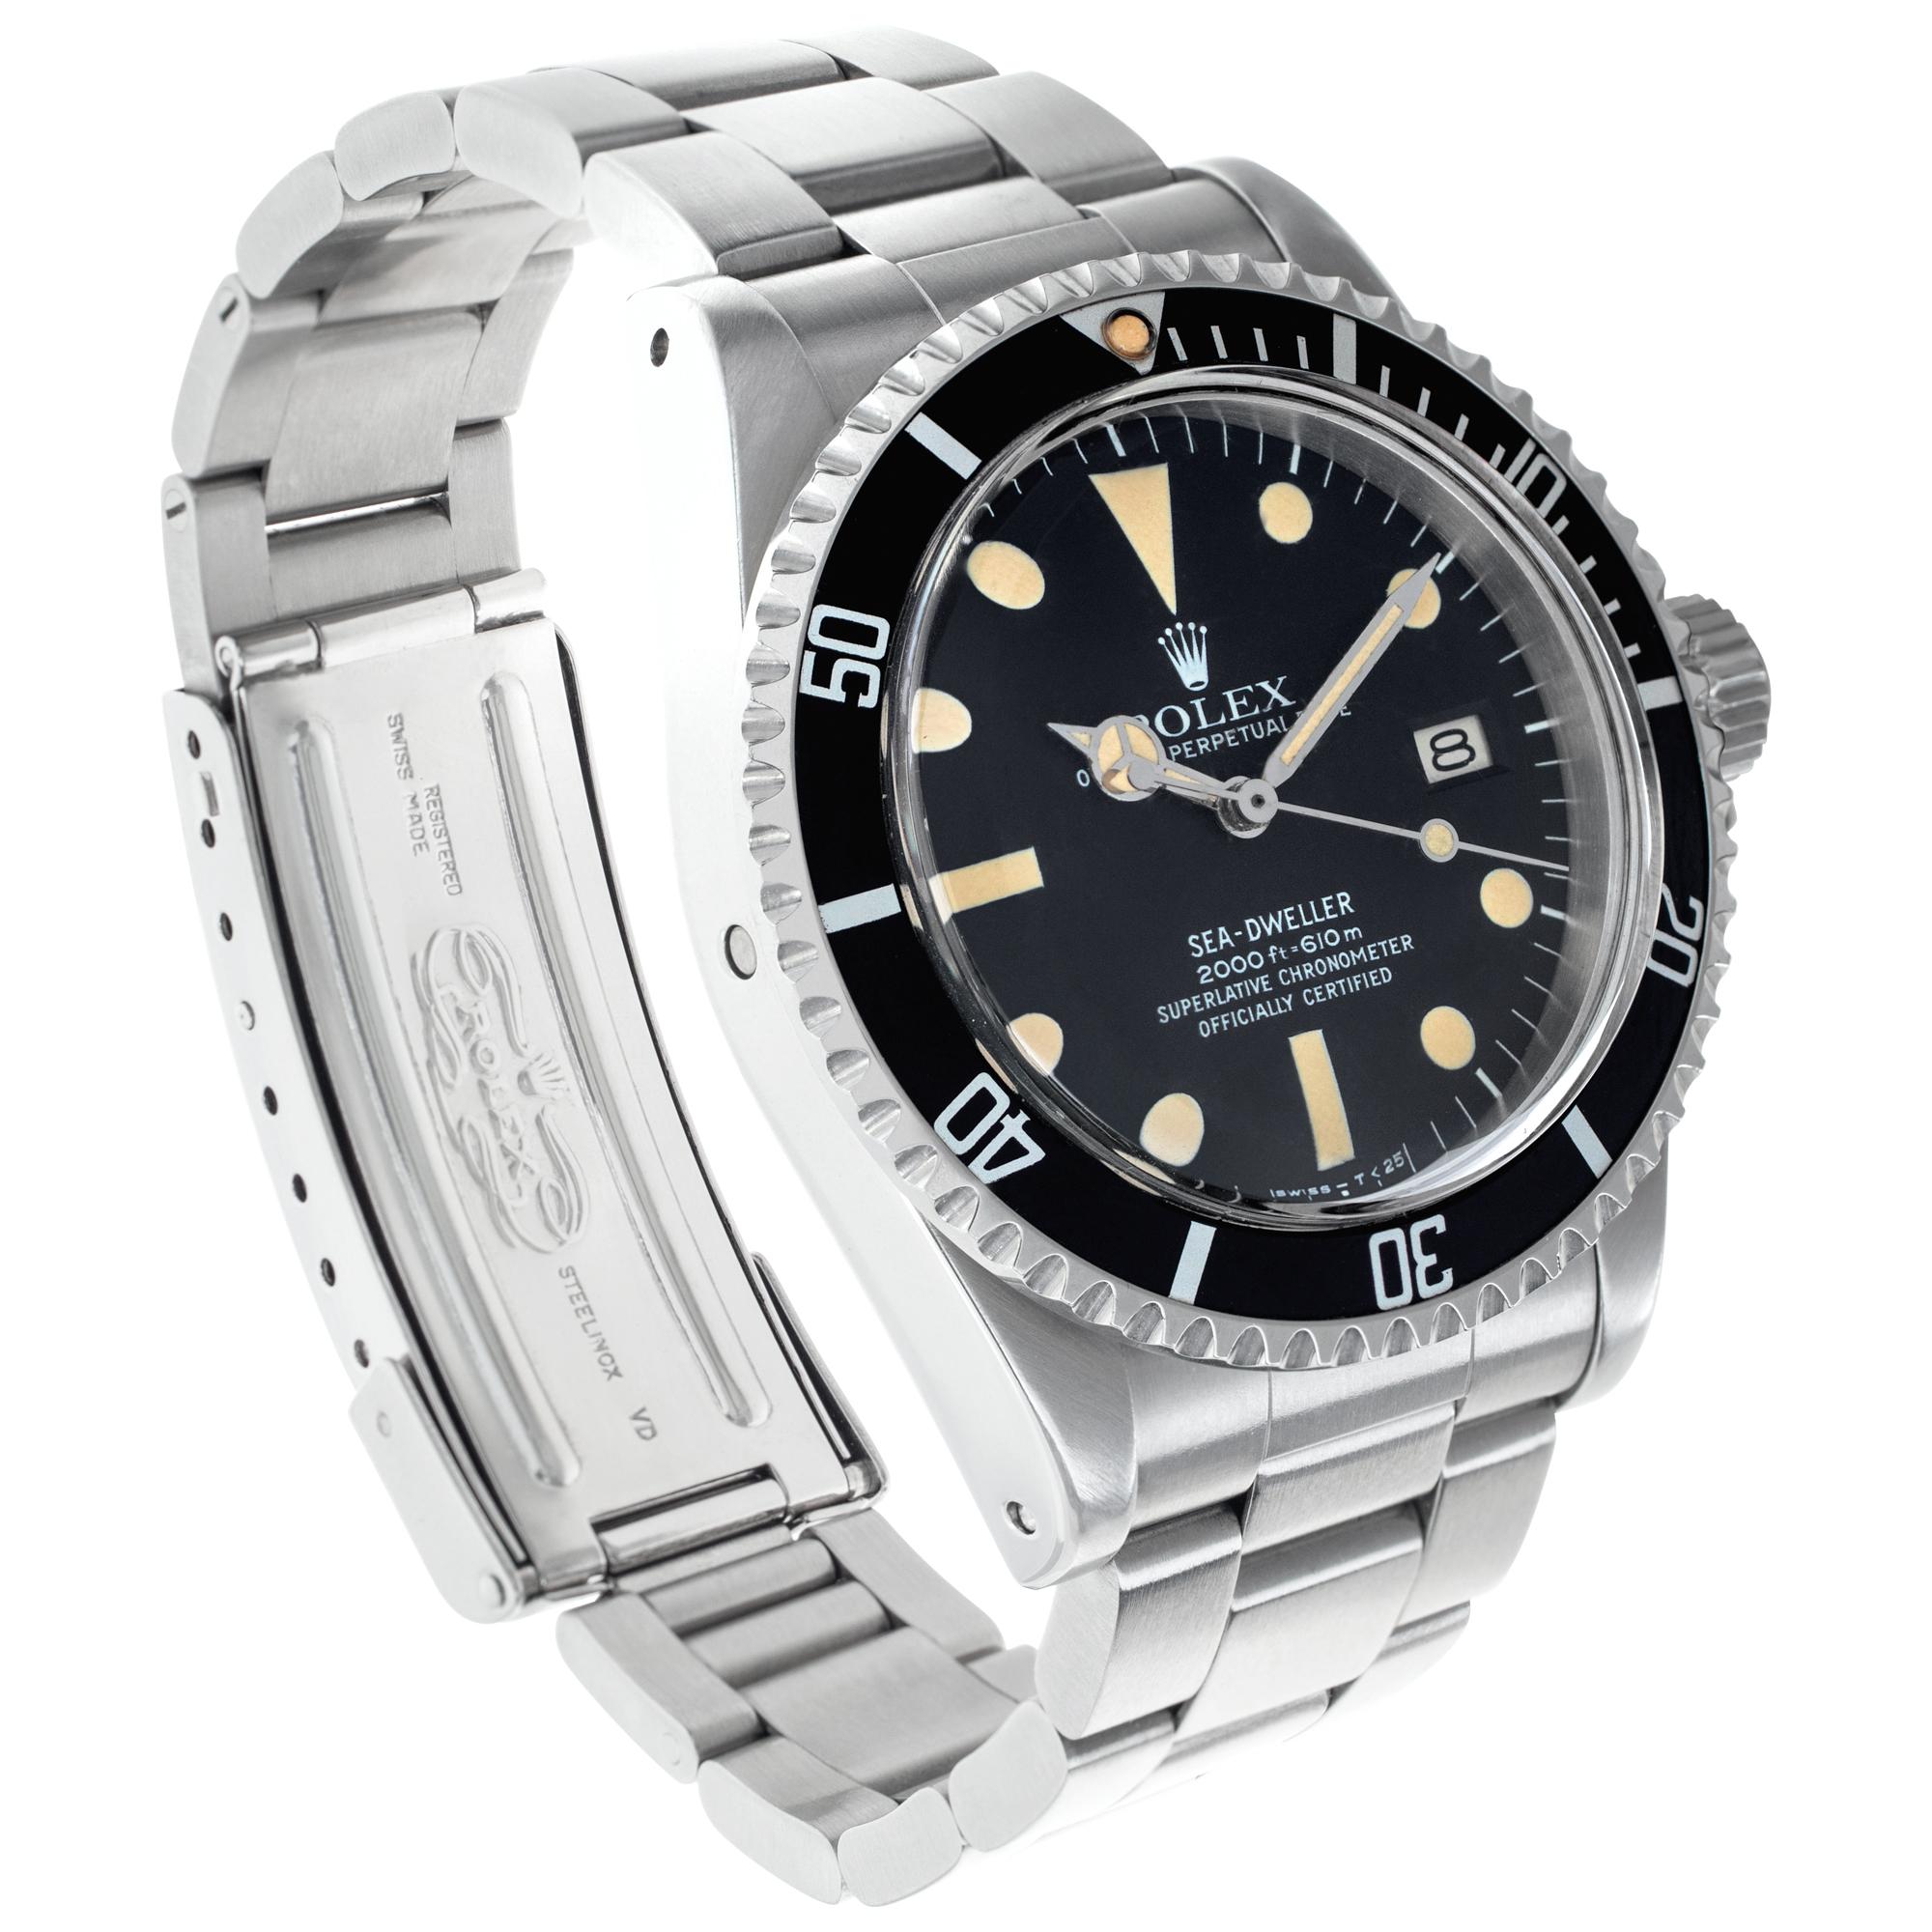 Rolex Sea-Dweller 1665 in stainless steel 40mm auto watch In Excellent Condition For Sale In Surfside, FL